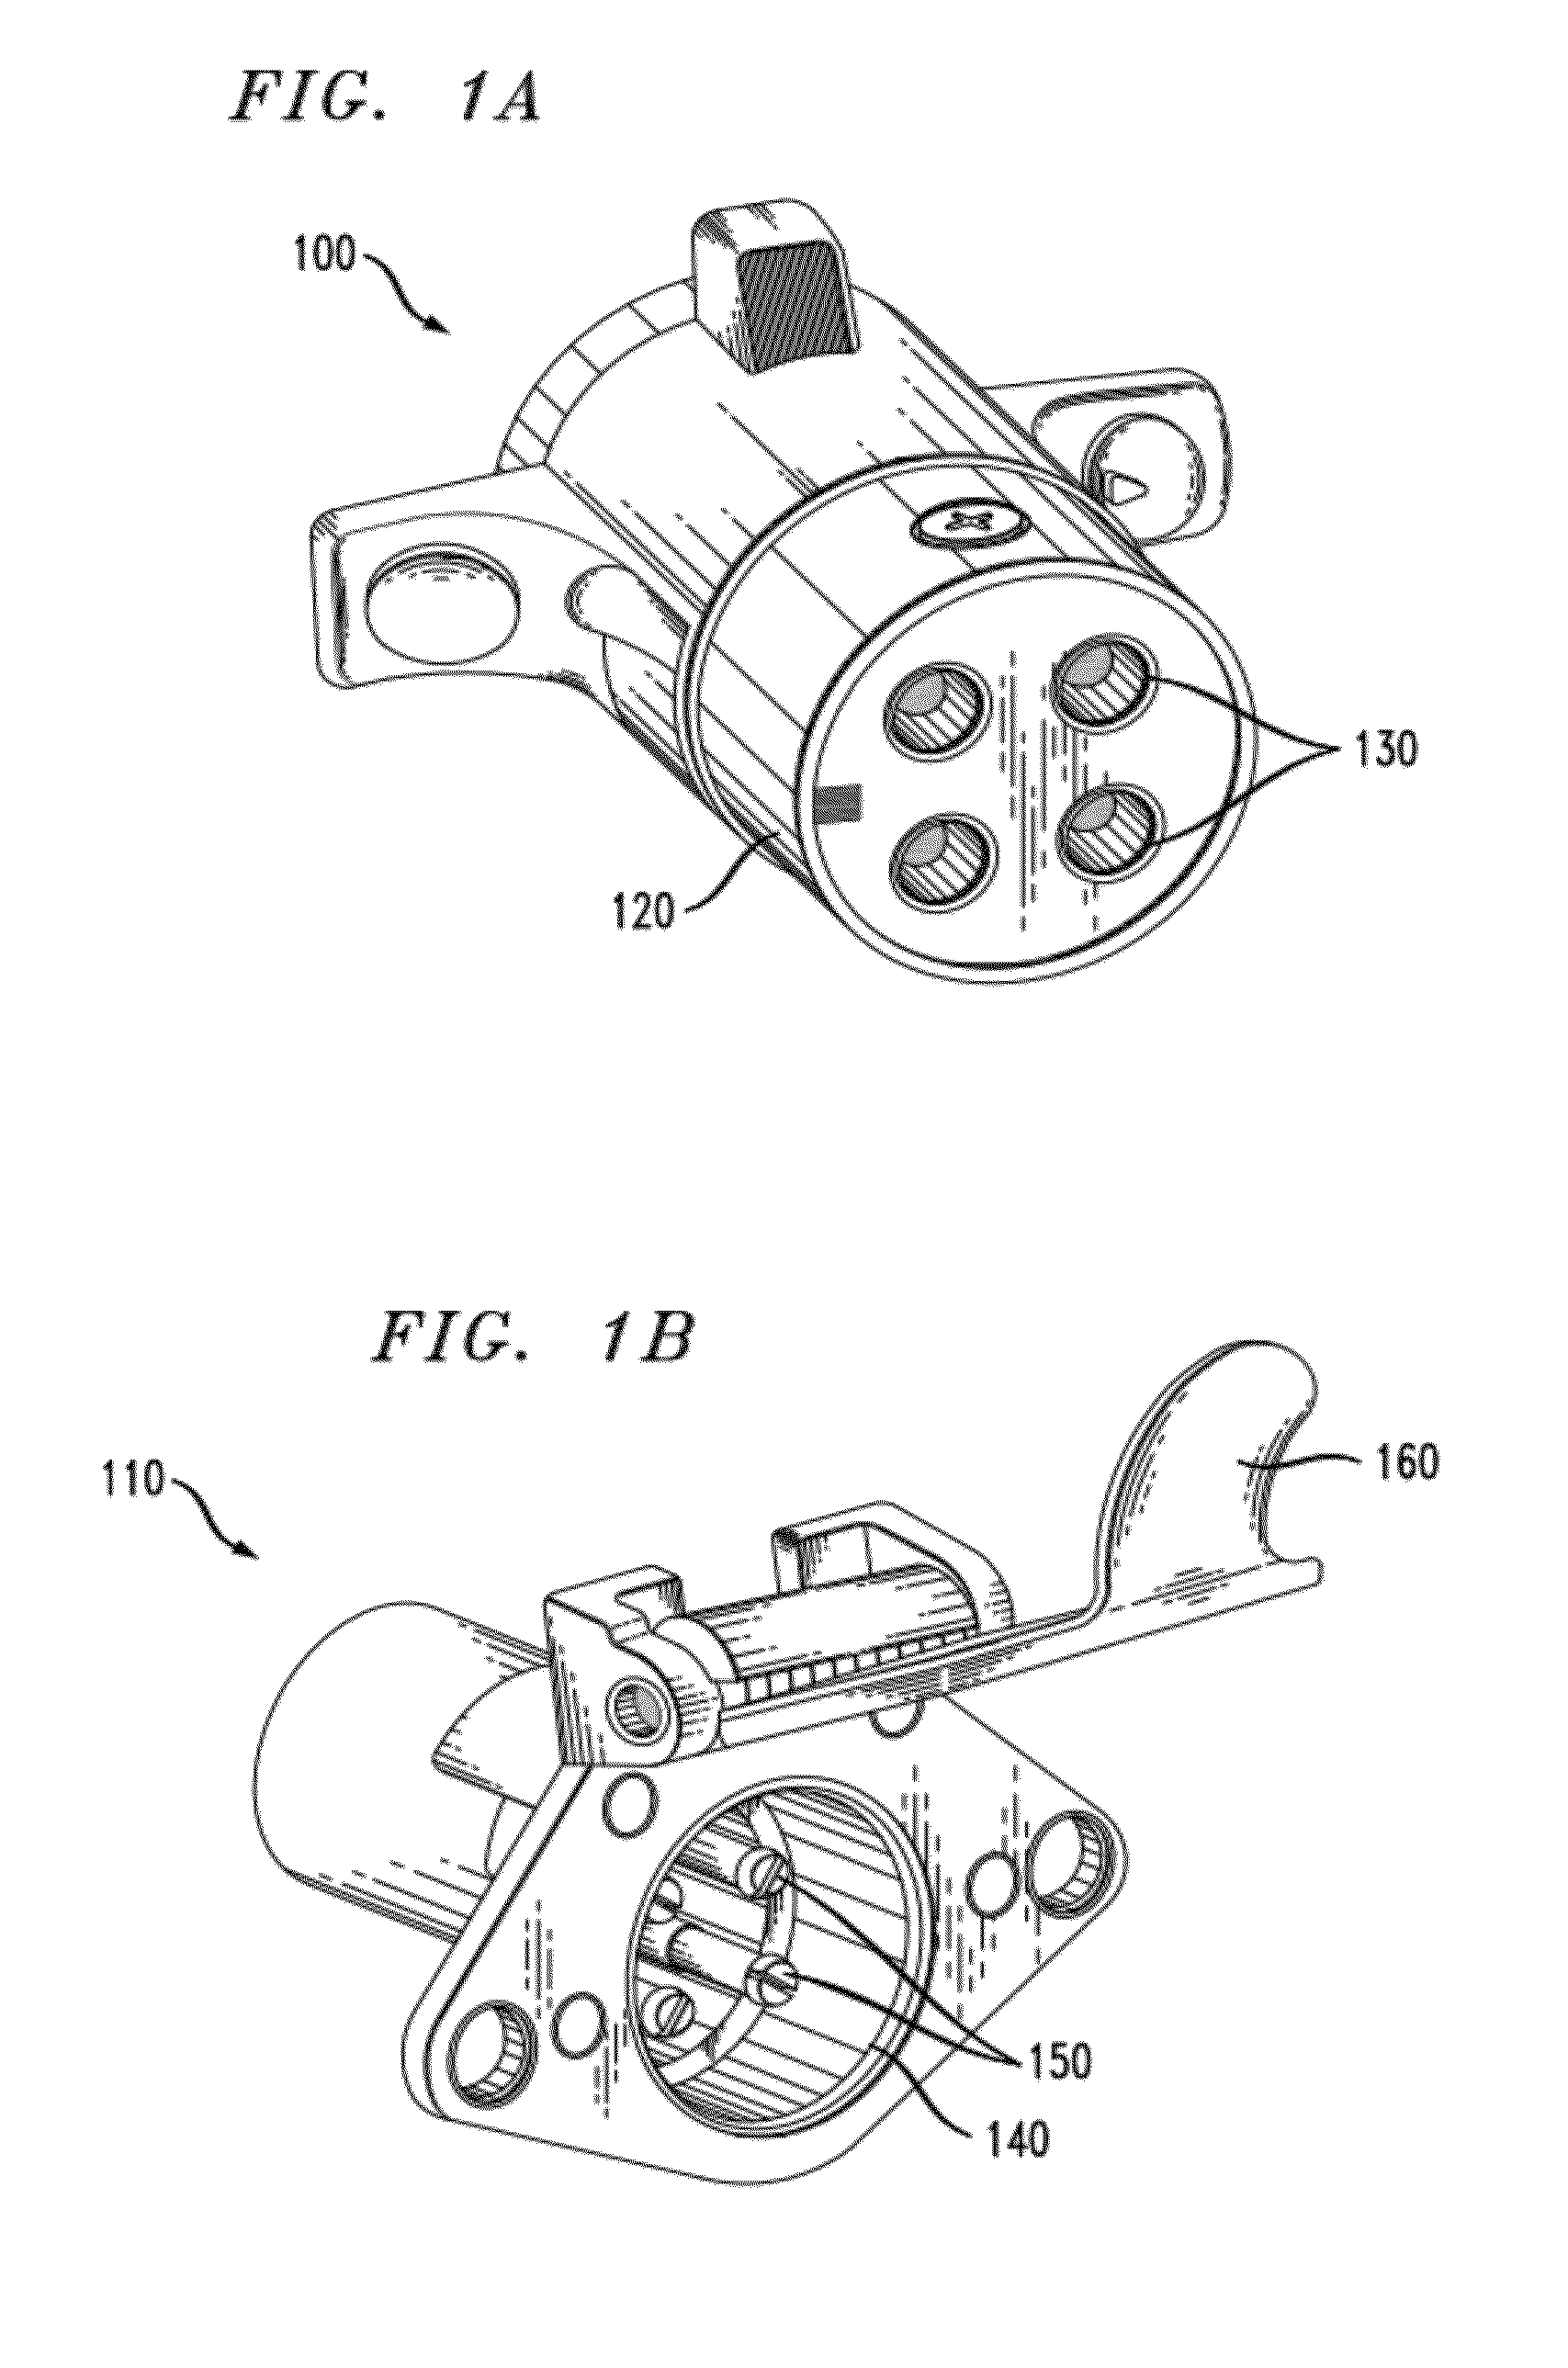 Apparatus for cleaning male electrical pins